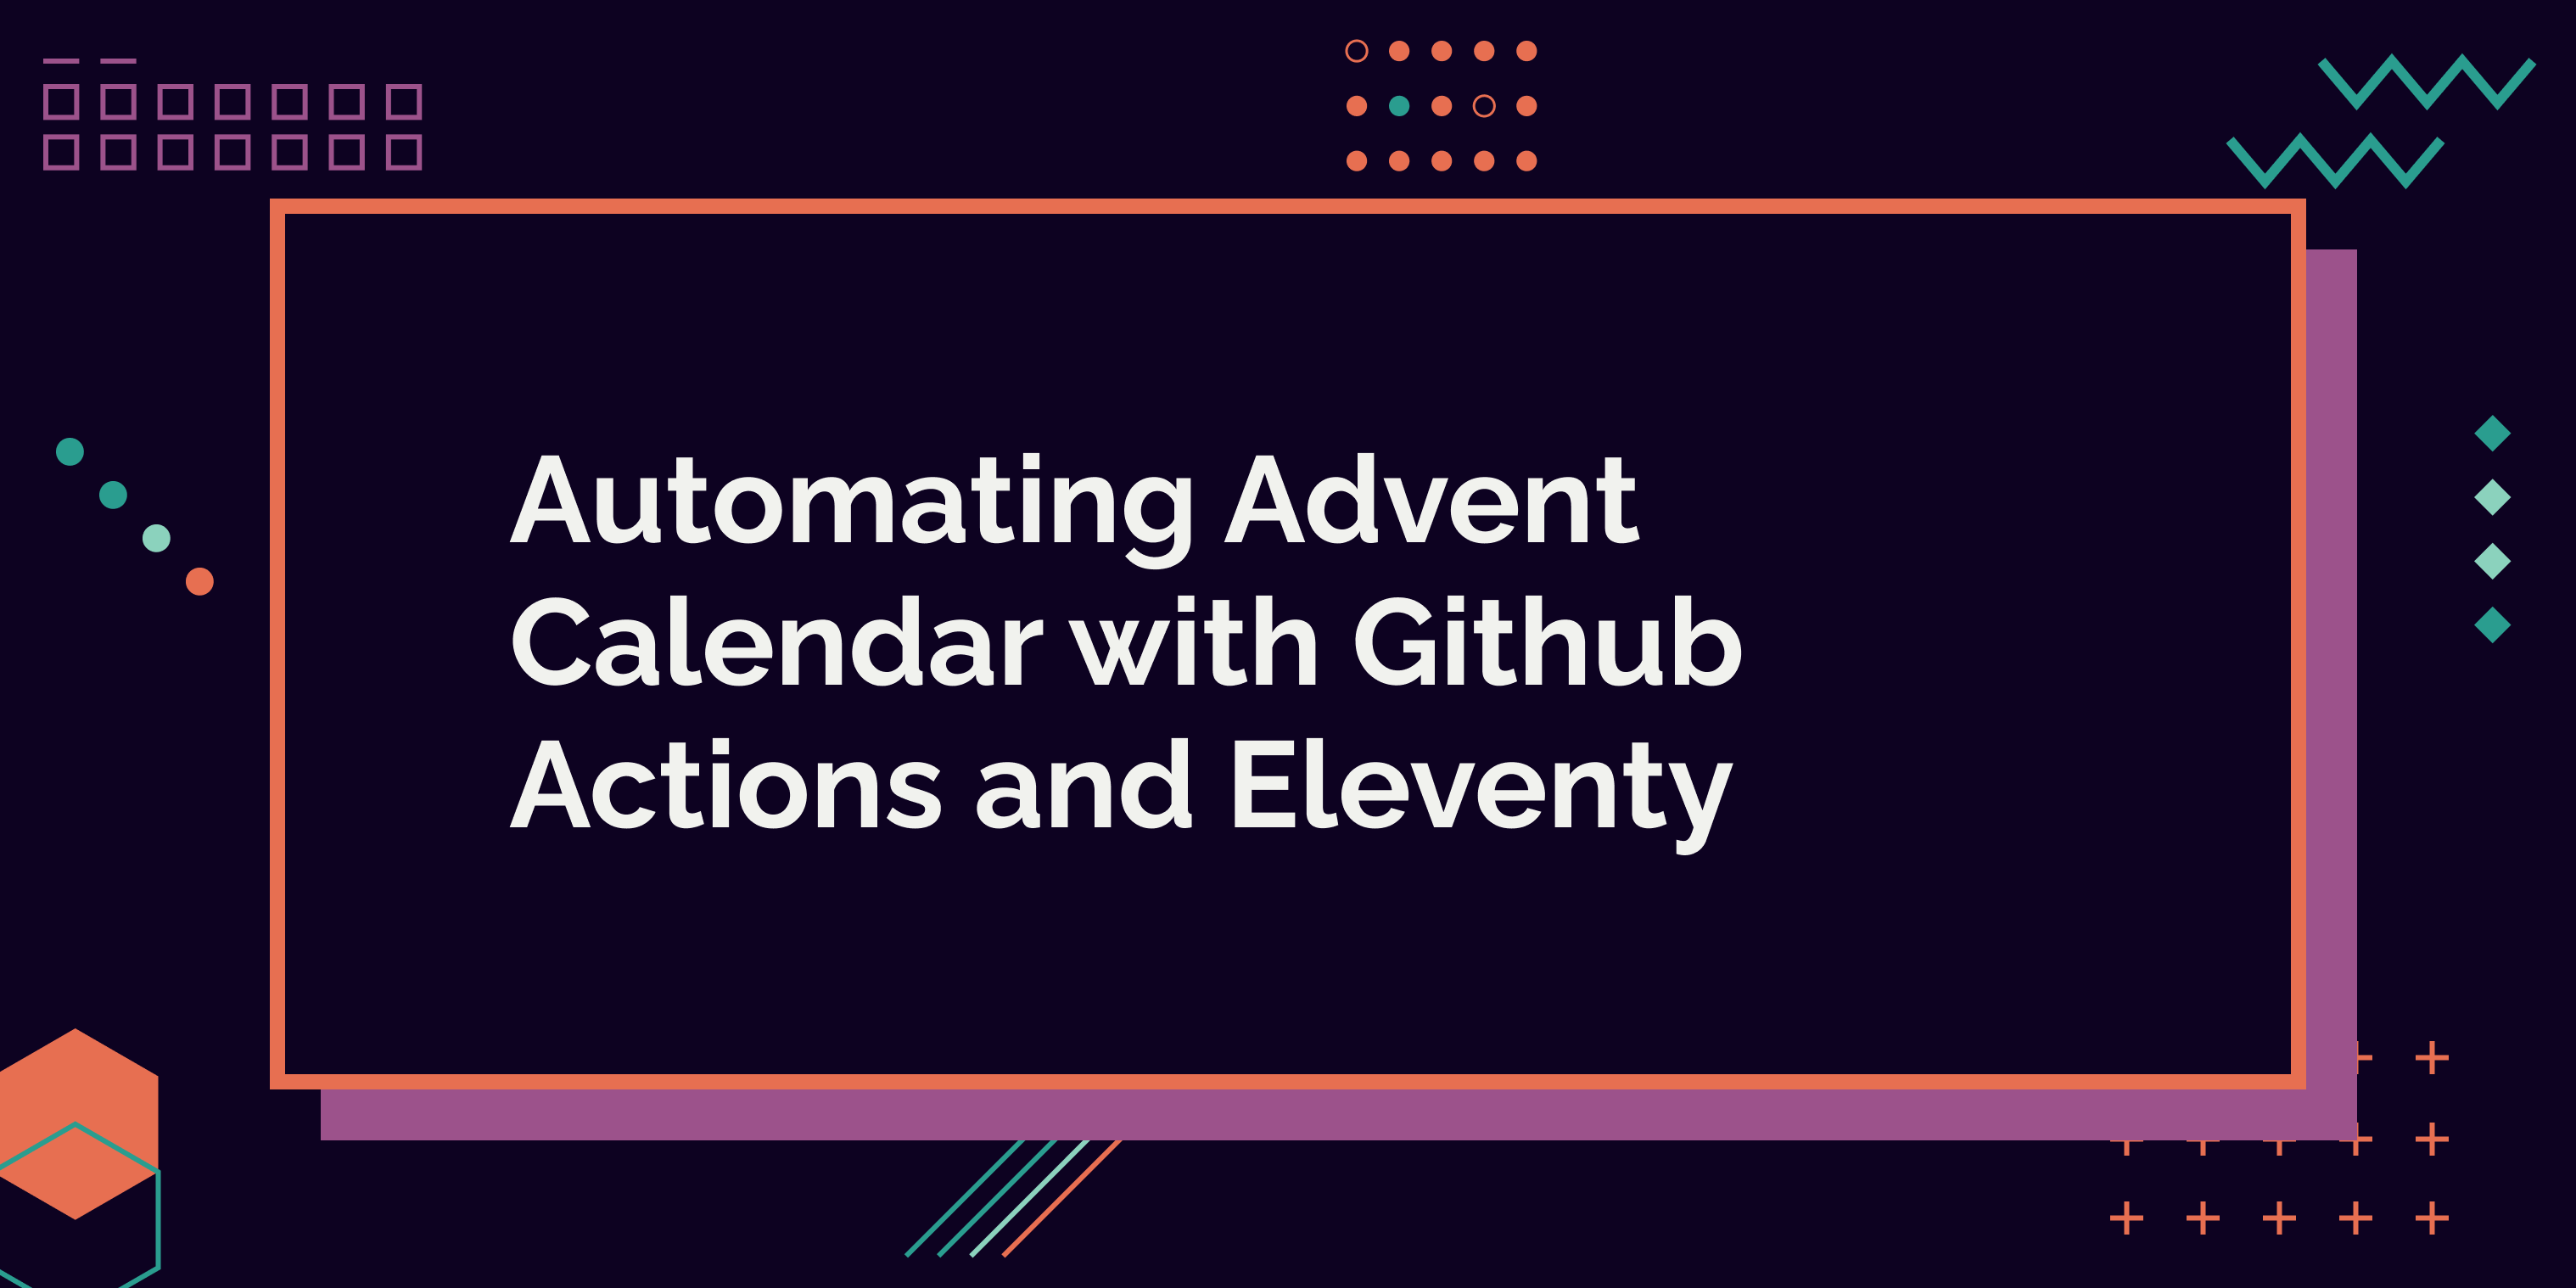 Automating Advent Calendar with Github Actions and Eleventy